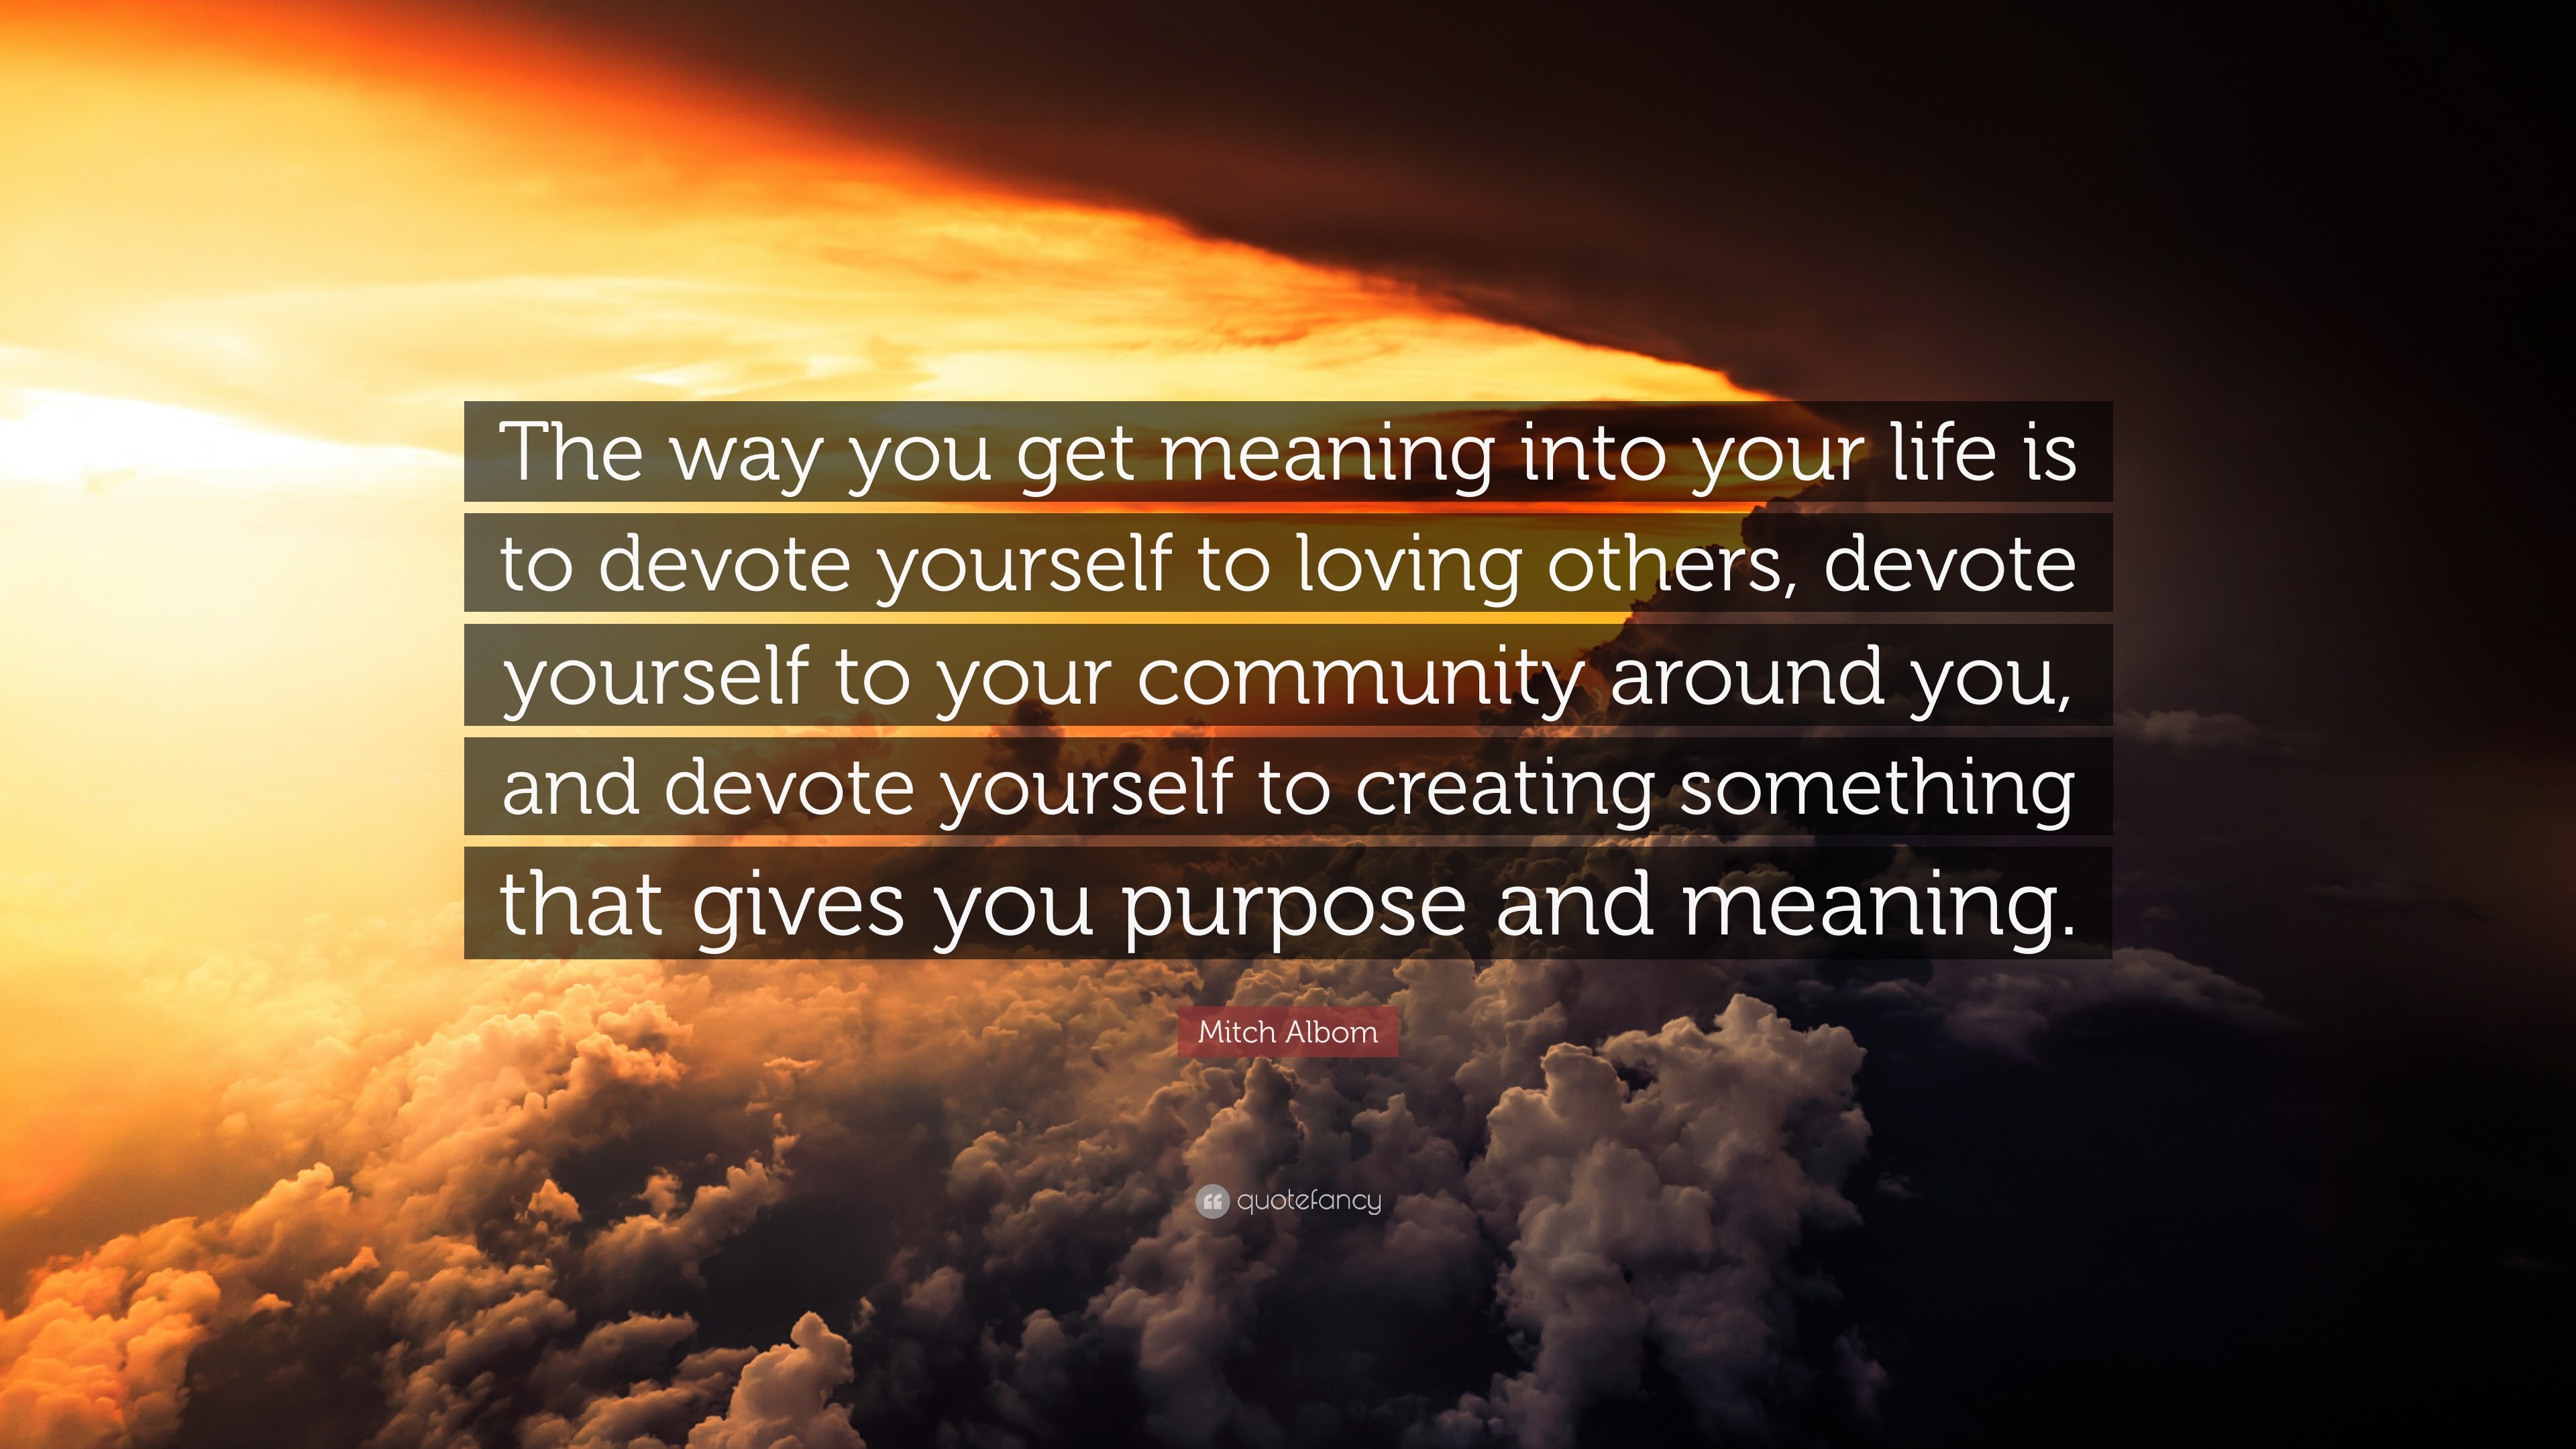 Mitch Albom Quote “The way you meaning into your life is to devote